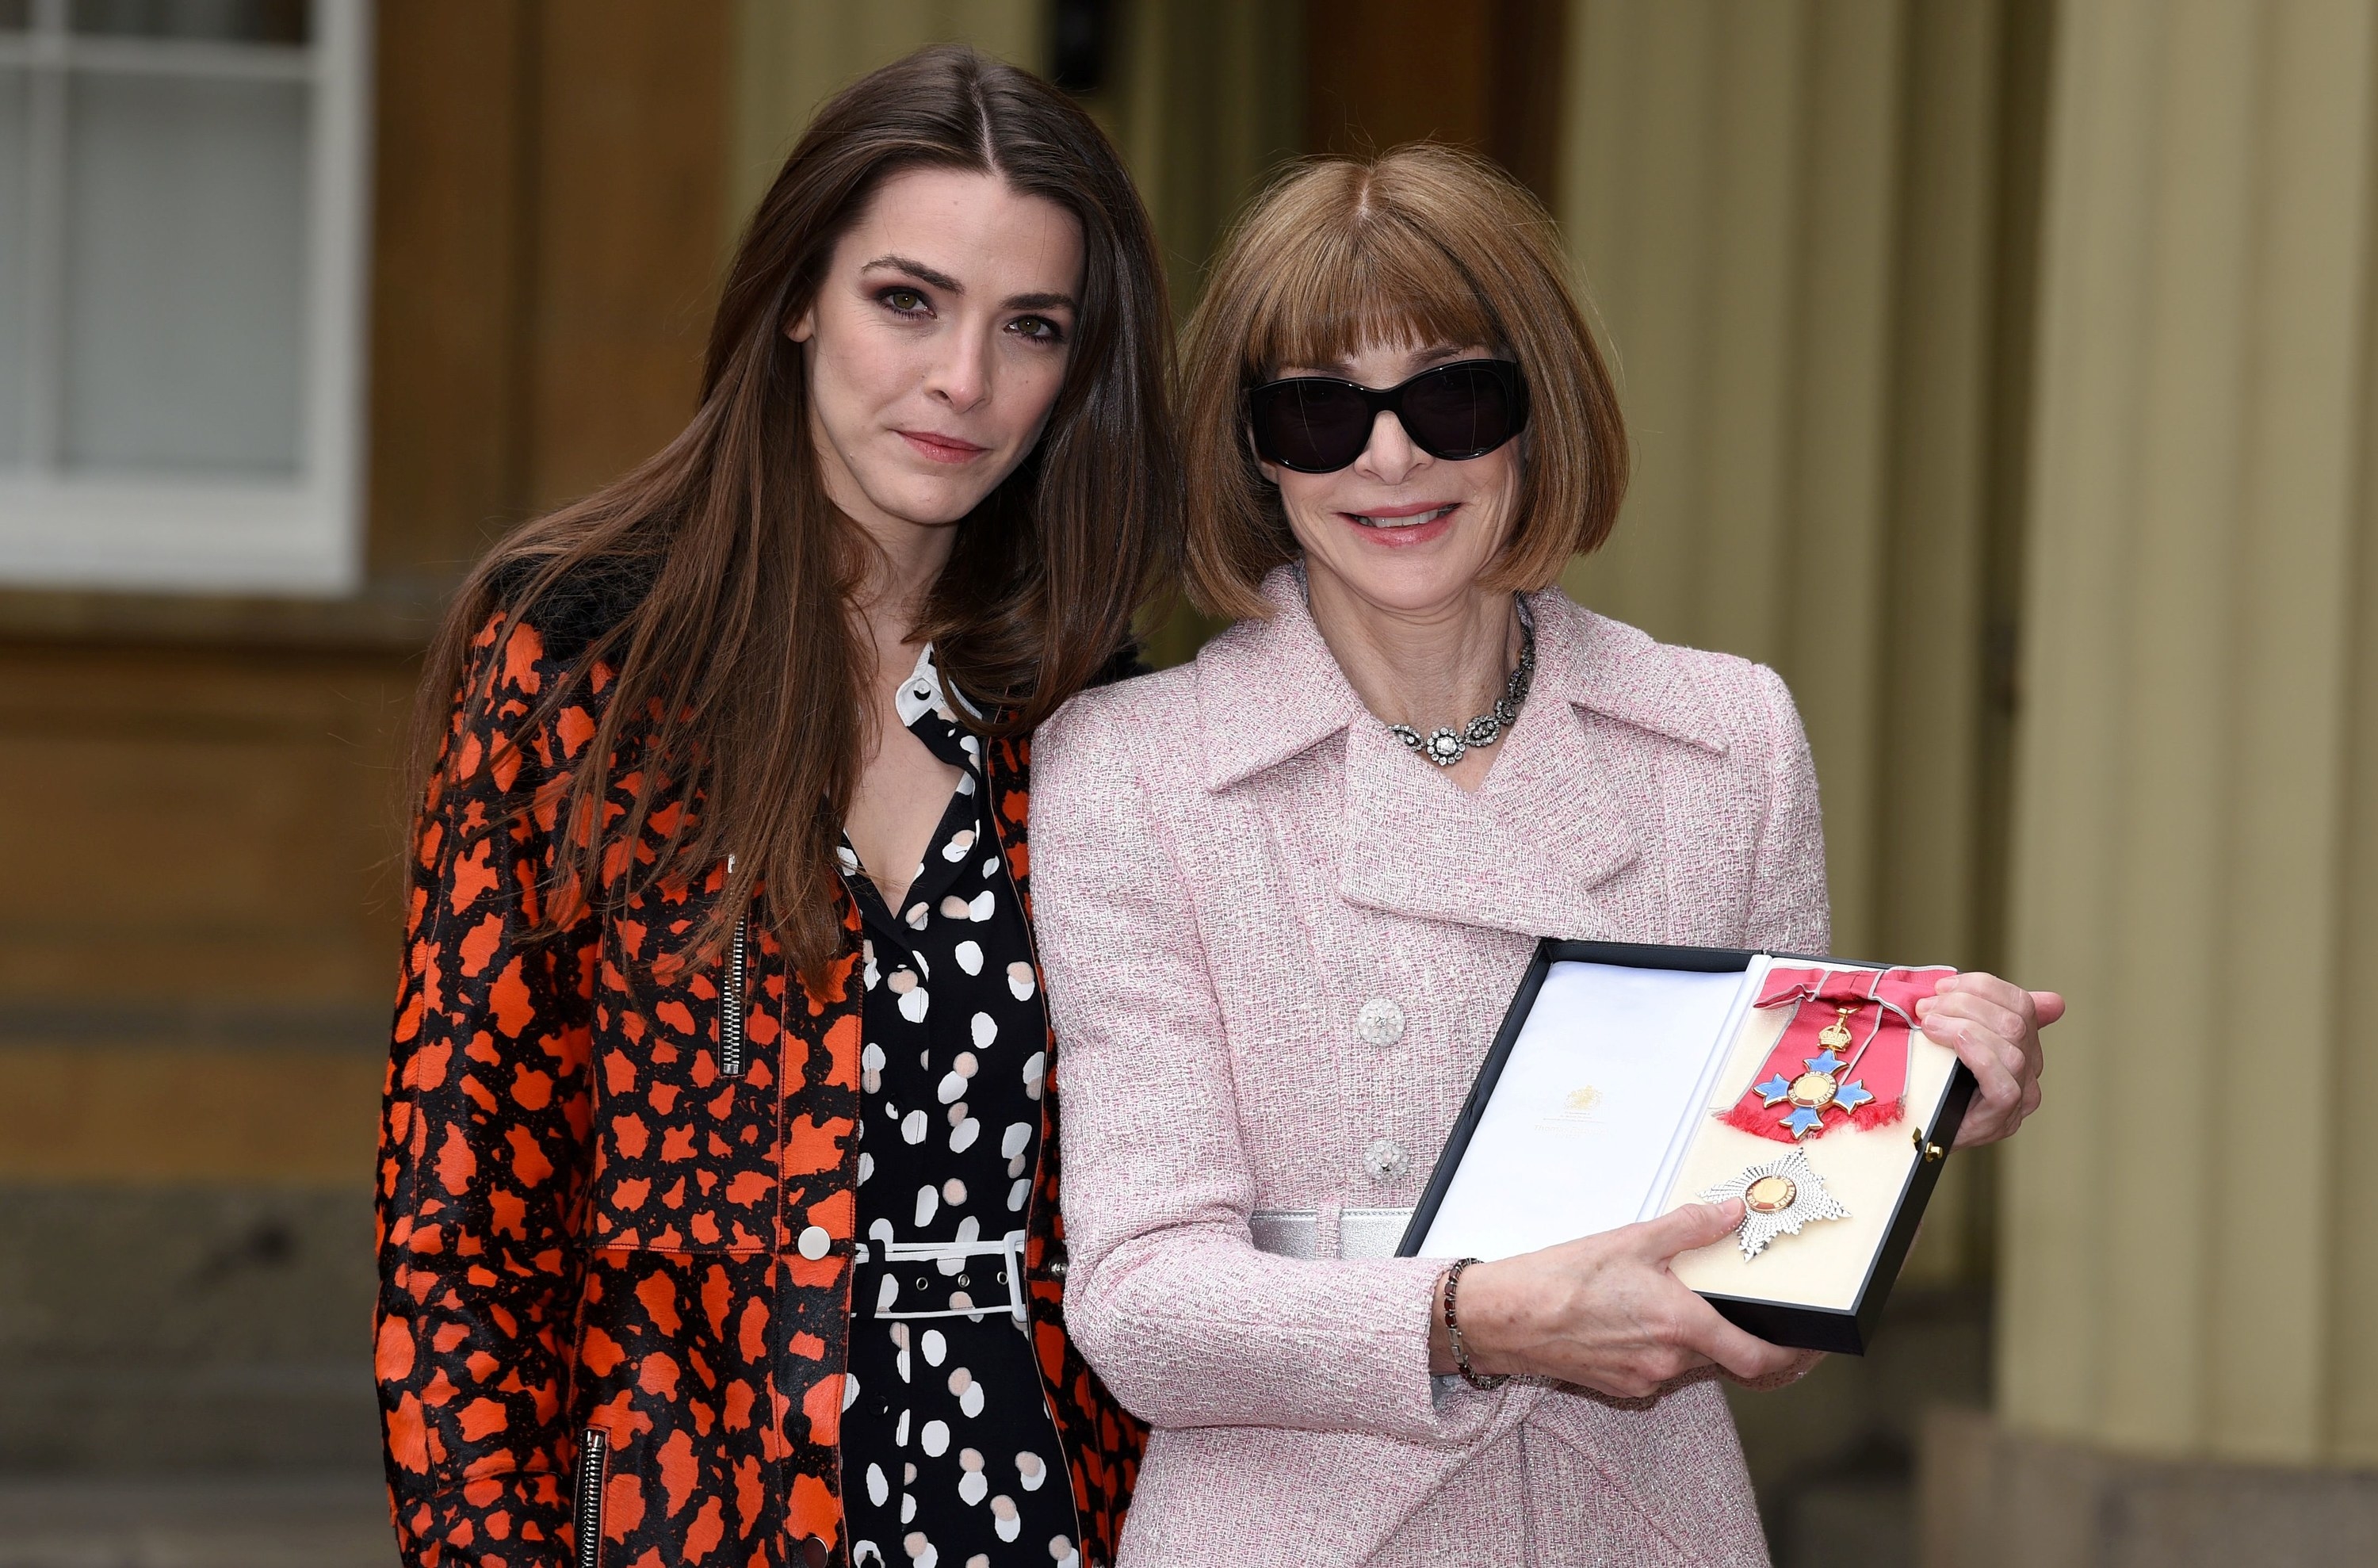 Anna Wintour smiling with her award